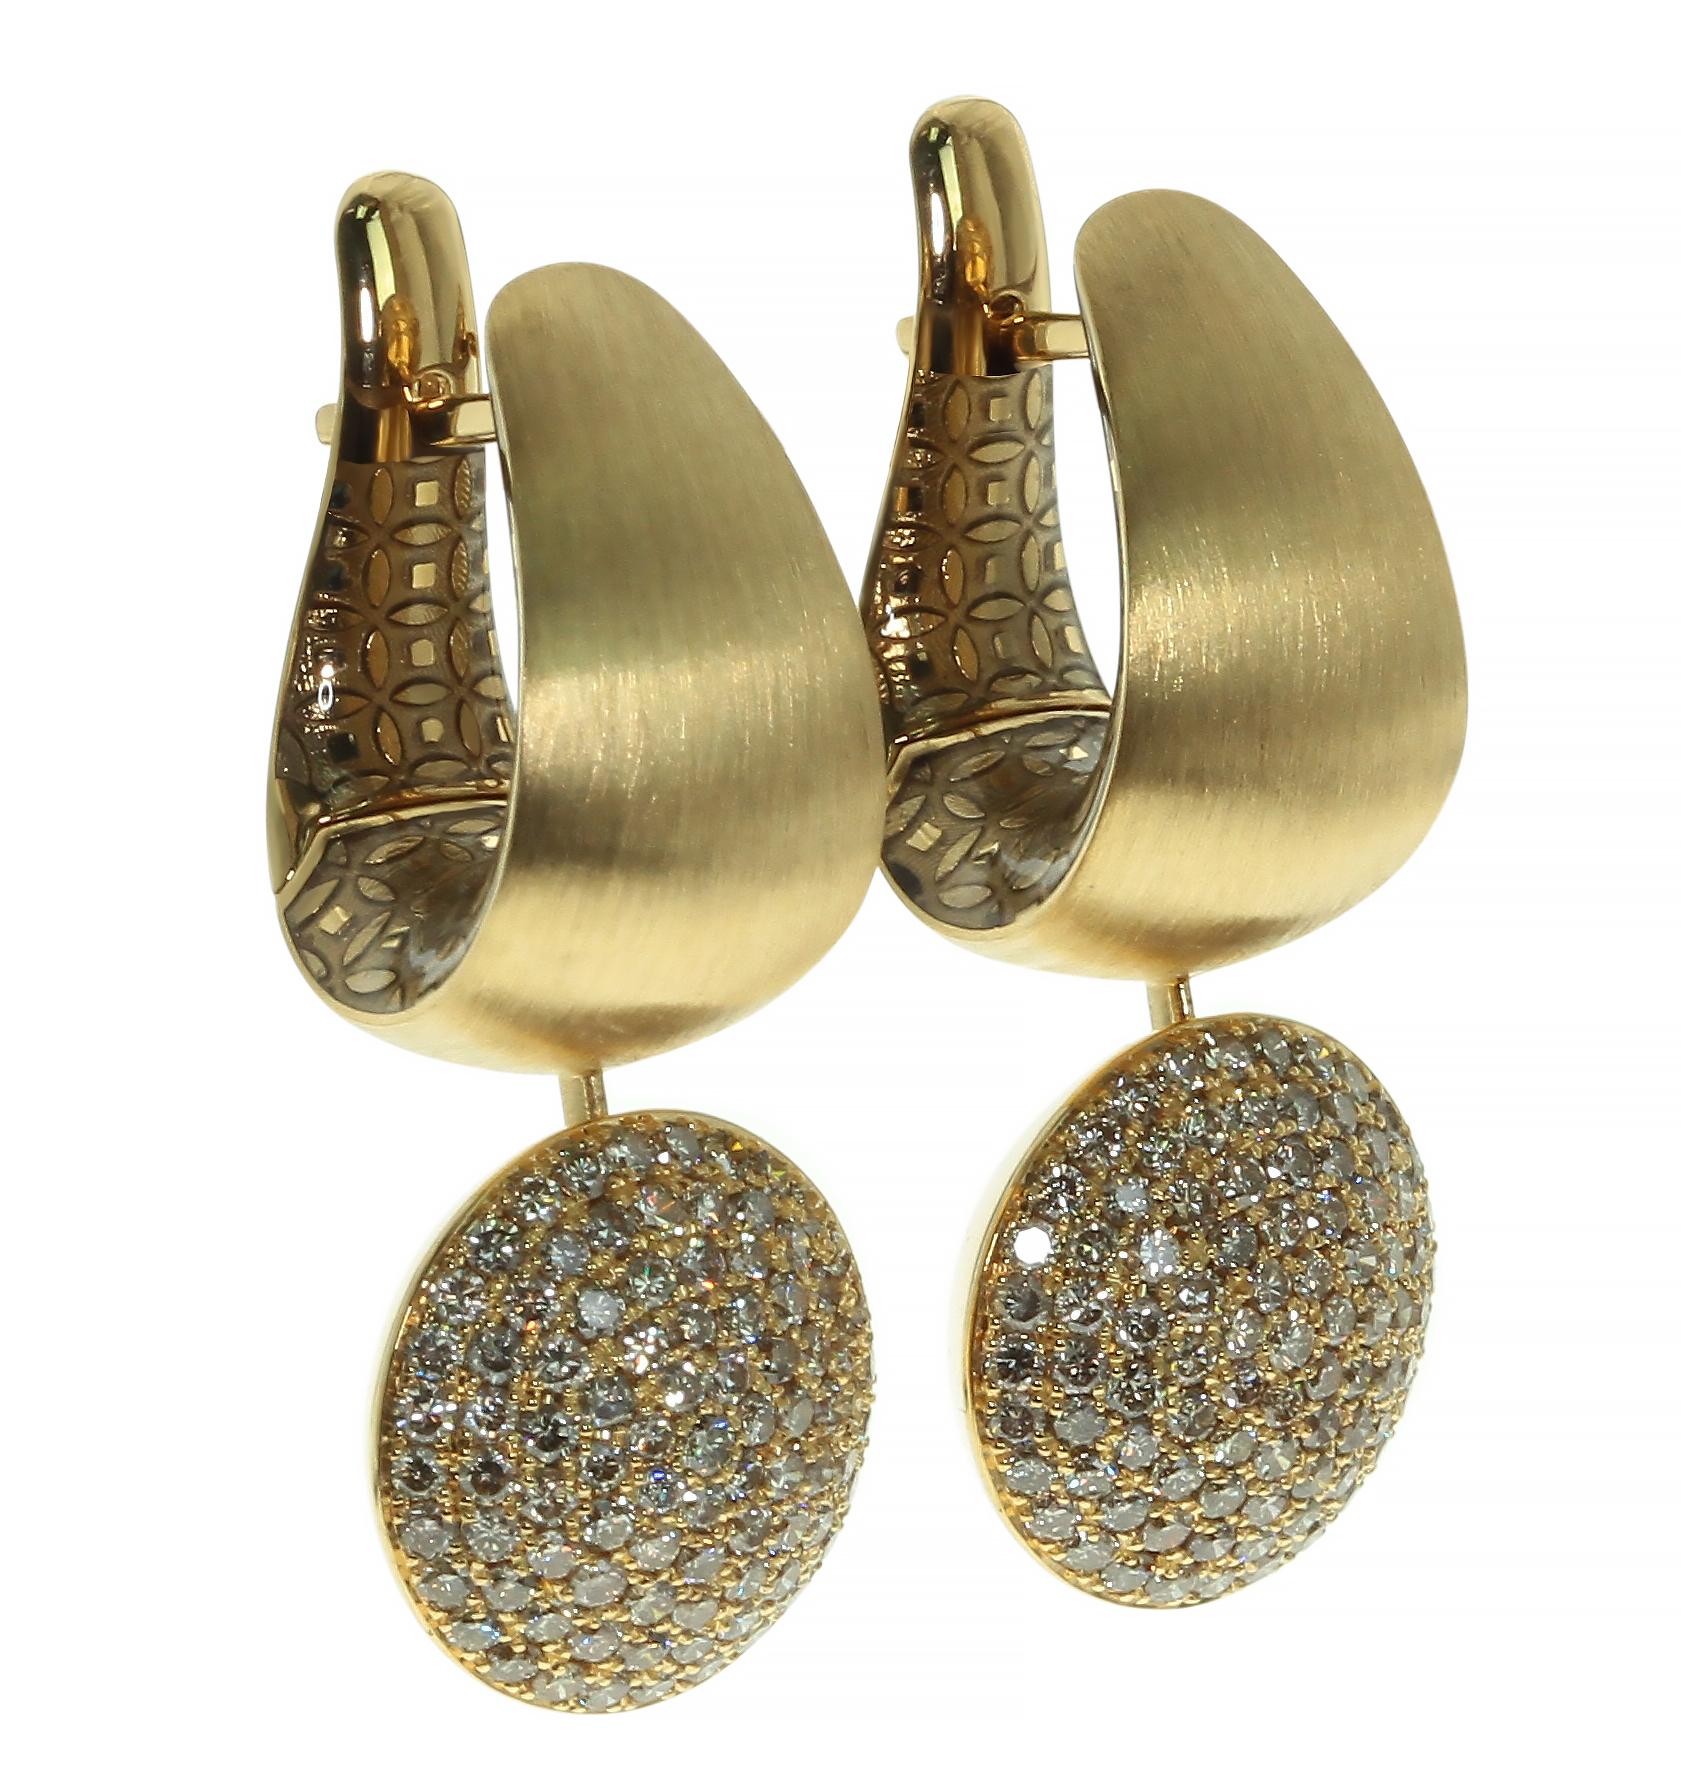 Diamonds Colored Enamel 18 Karat Yellow Gold Kaleidoscope Earrings

Please take a look at one of our trade mark texture in Kaleidoscope Collection - 